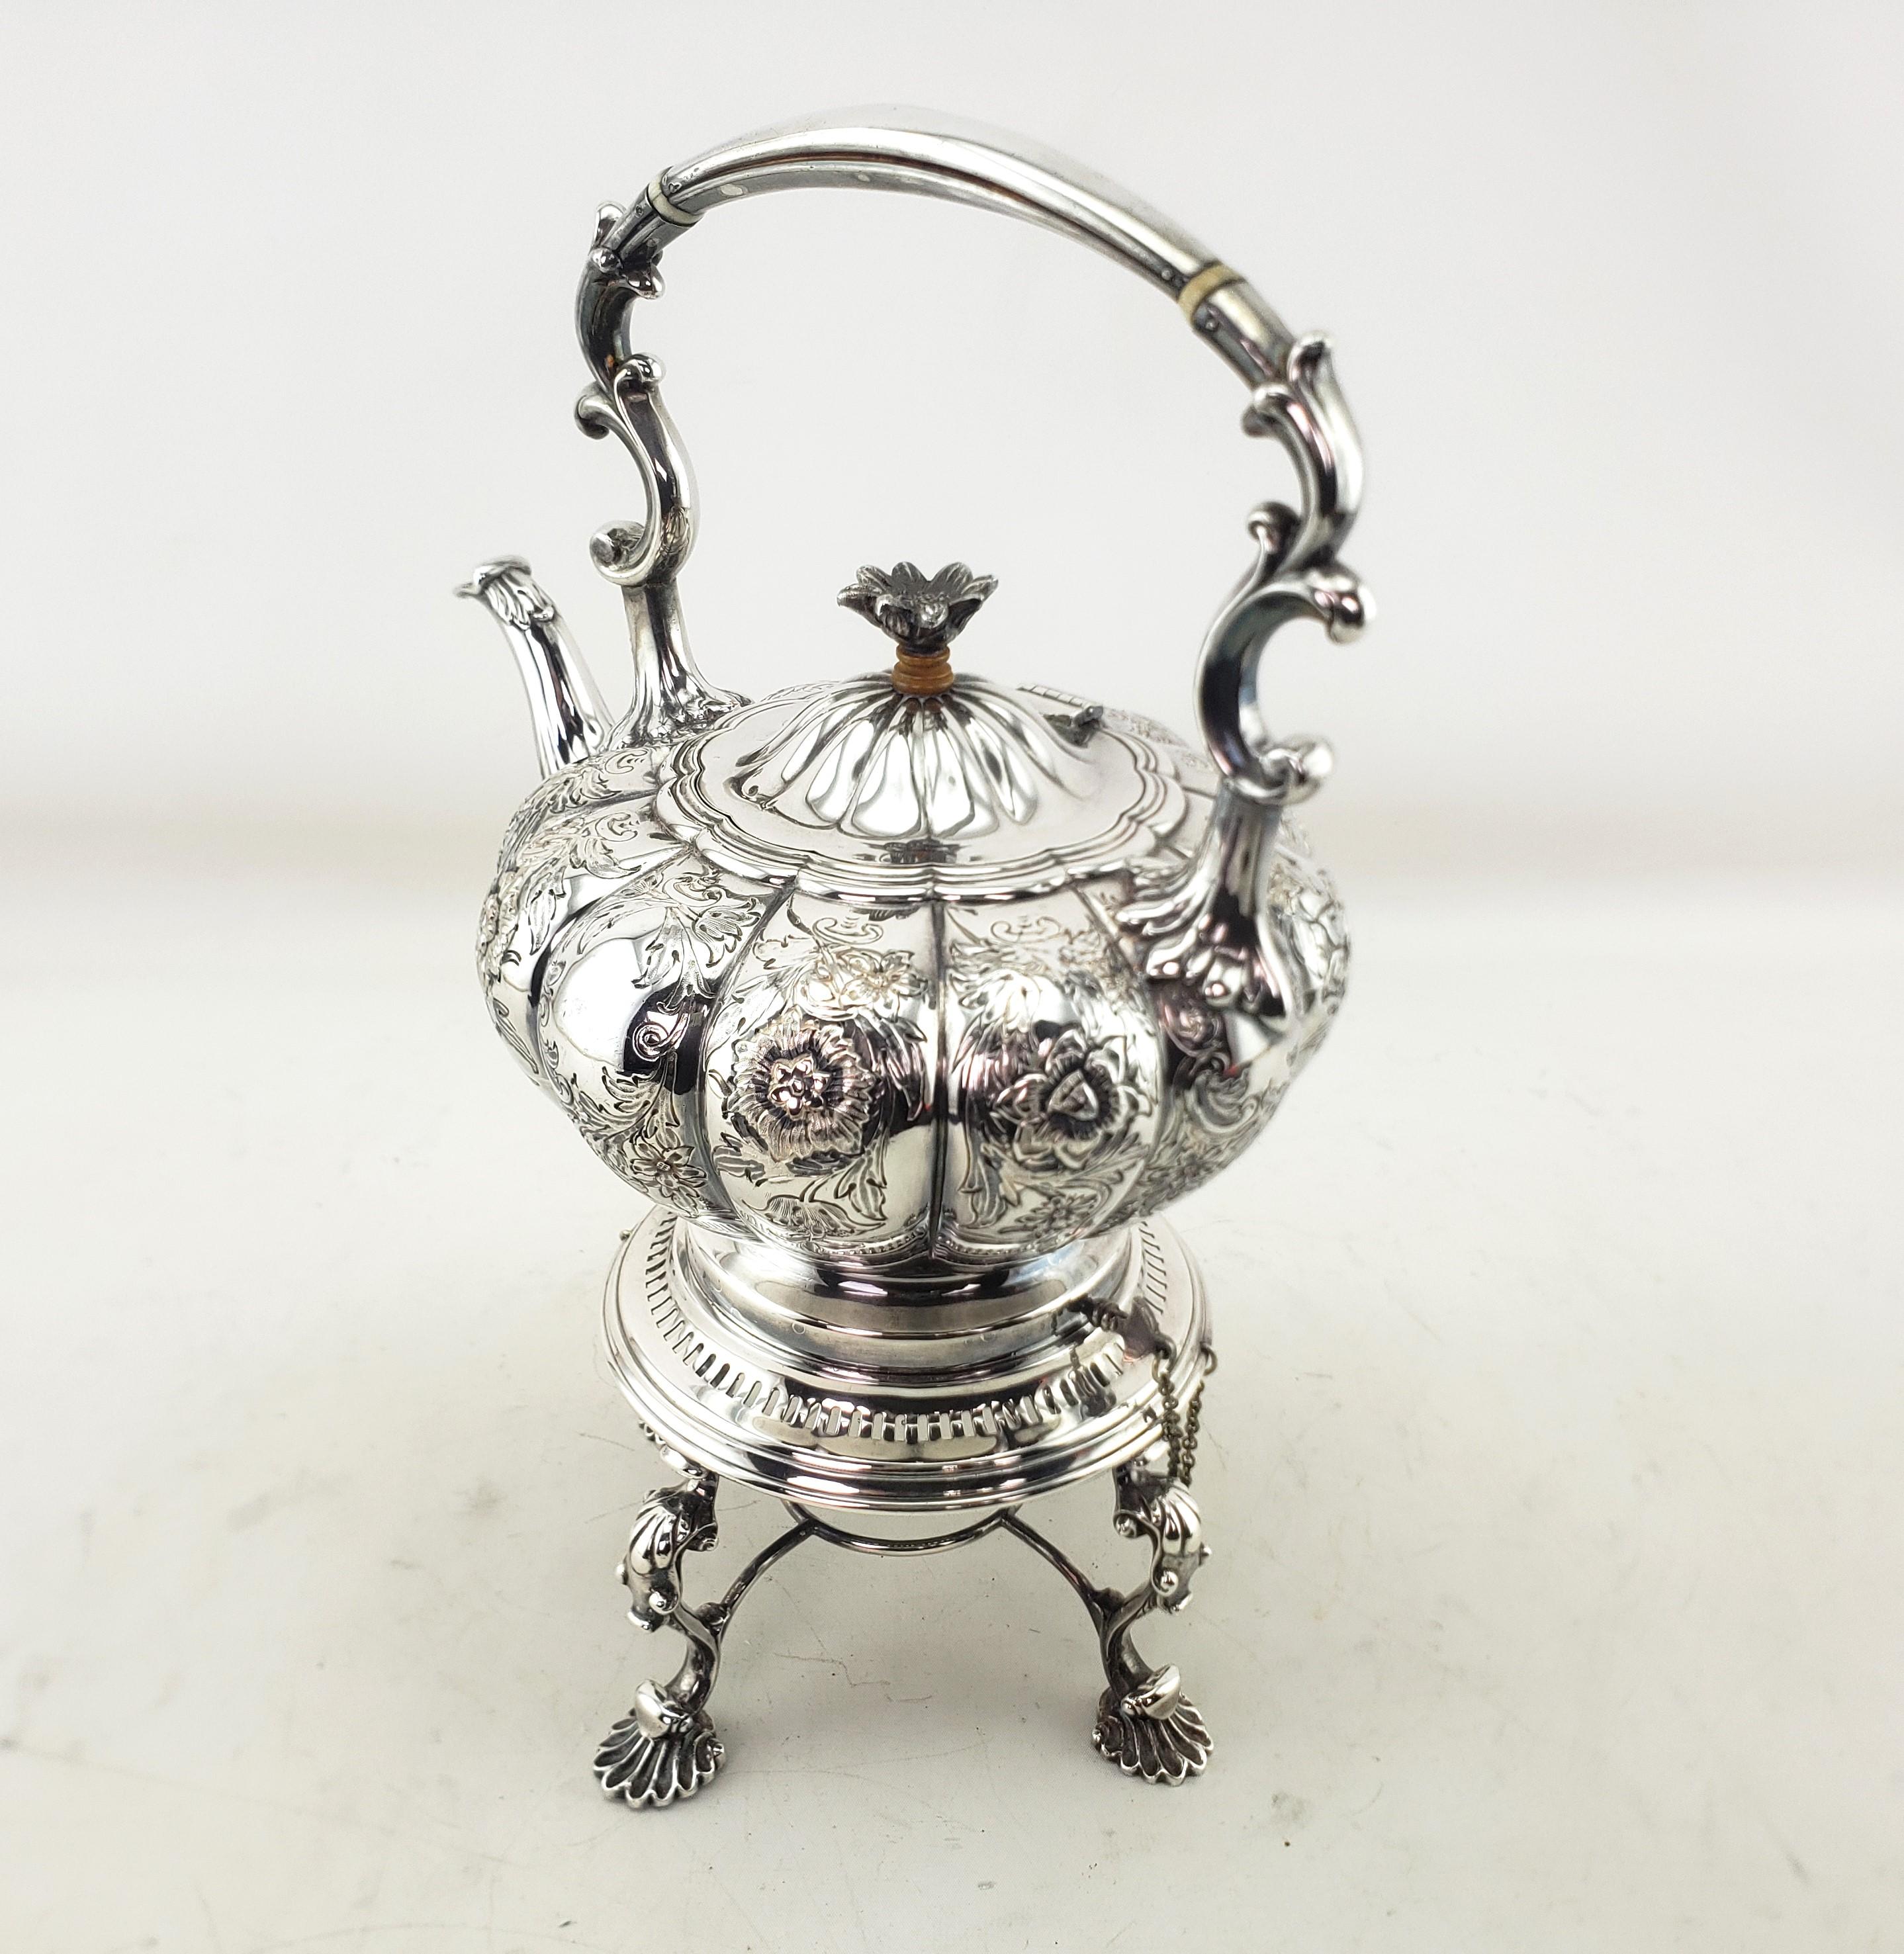 Antique English Silver Plated Tipping Hot Water Kettle with Chased Floral Motif In Good Condition For Sale In Hamilton, Ontario